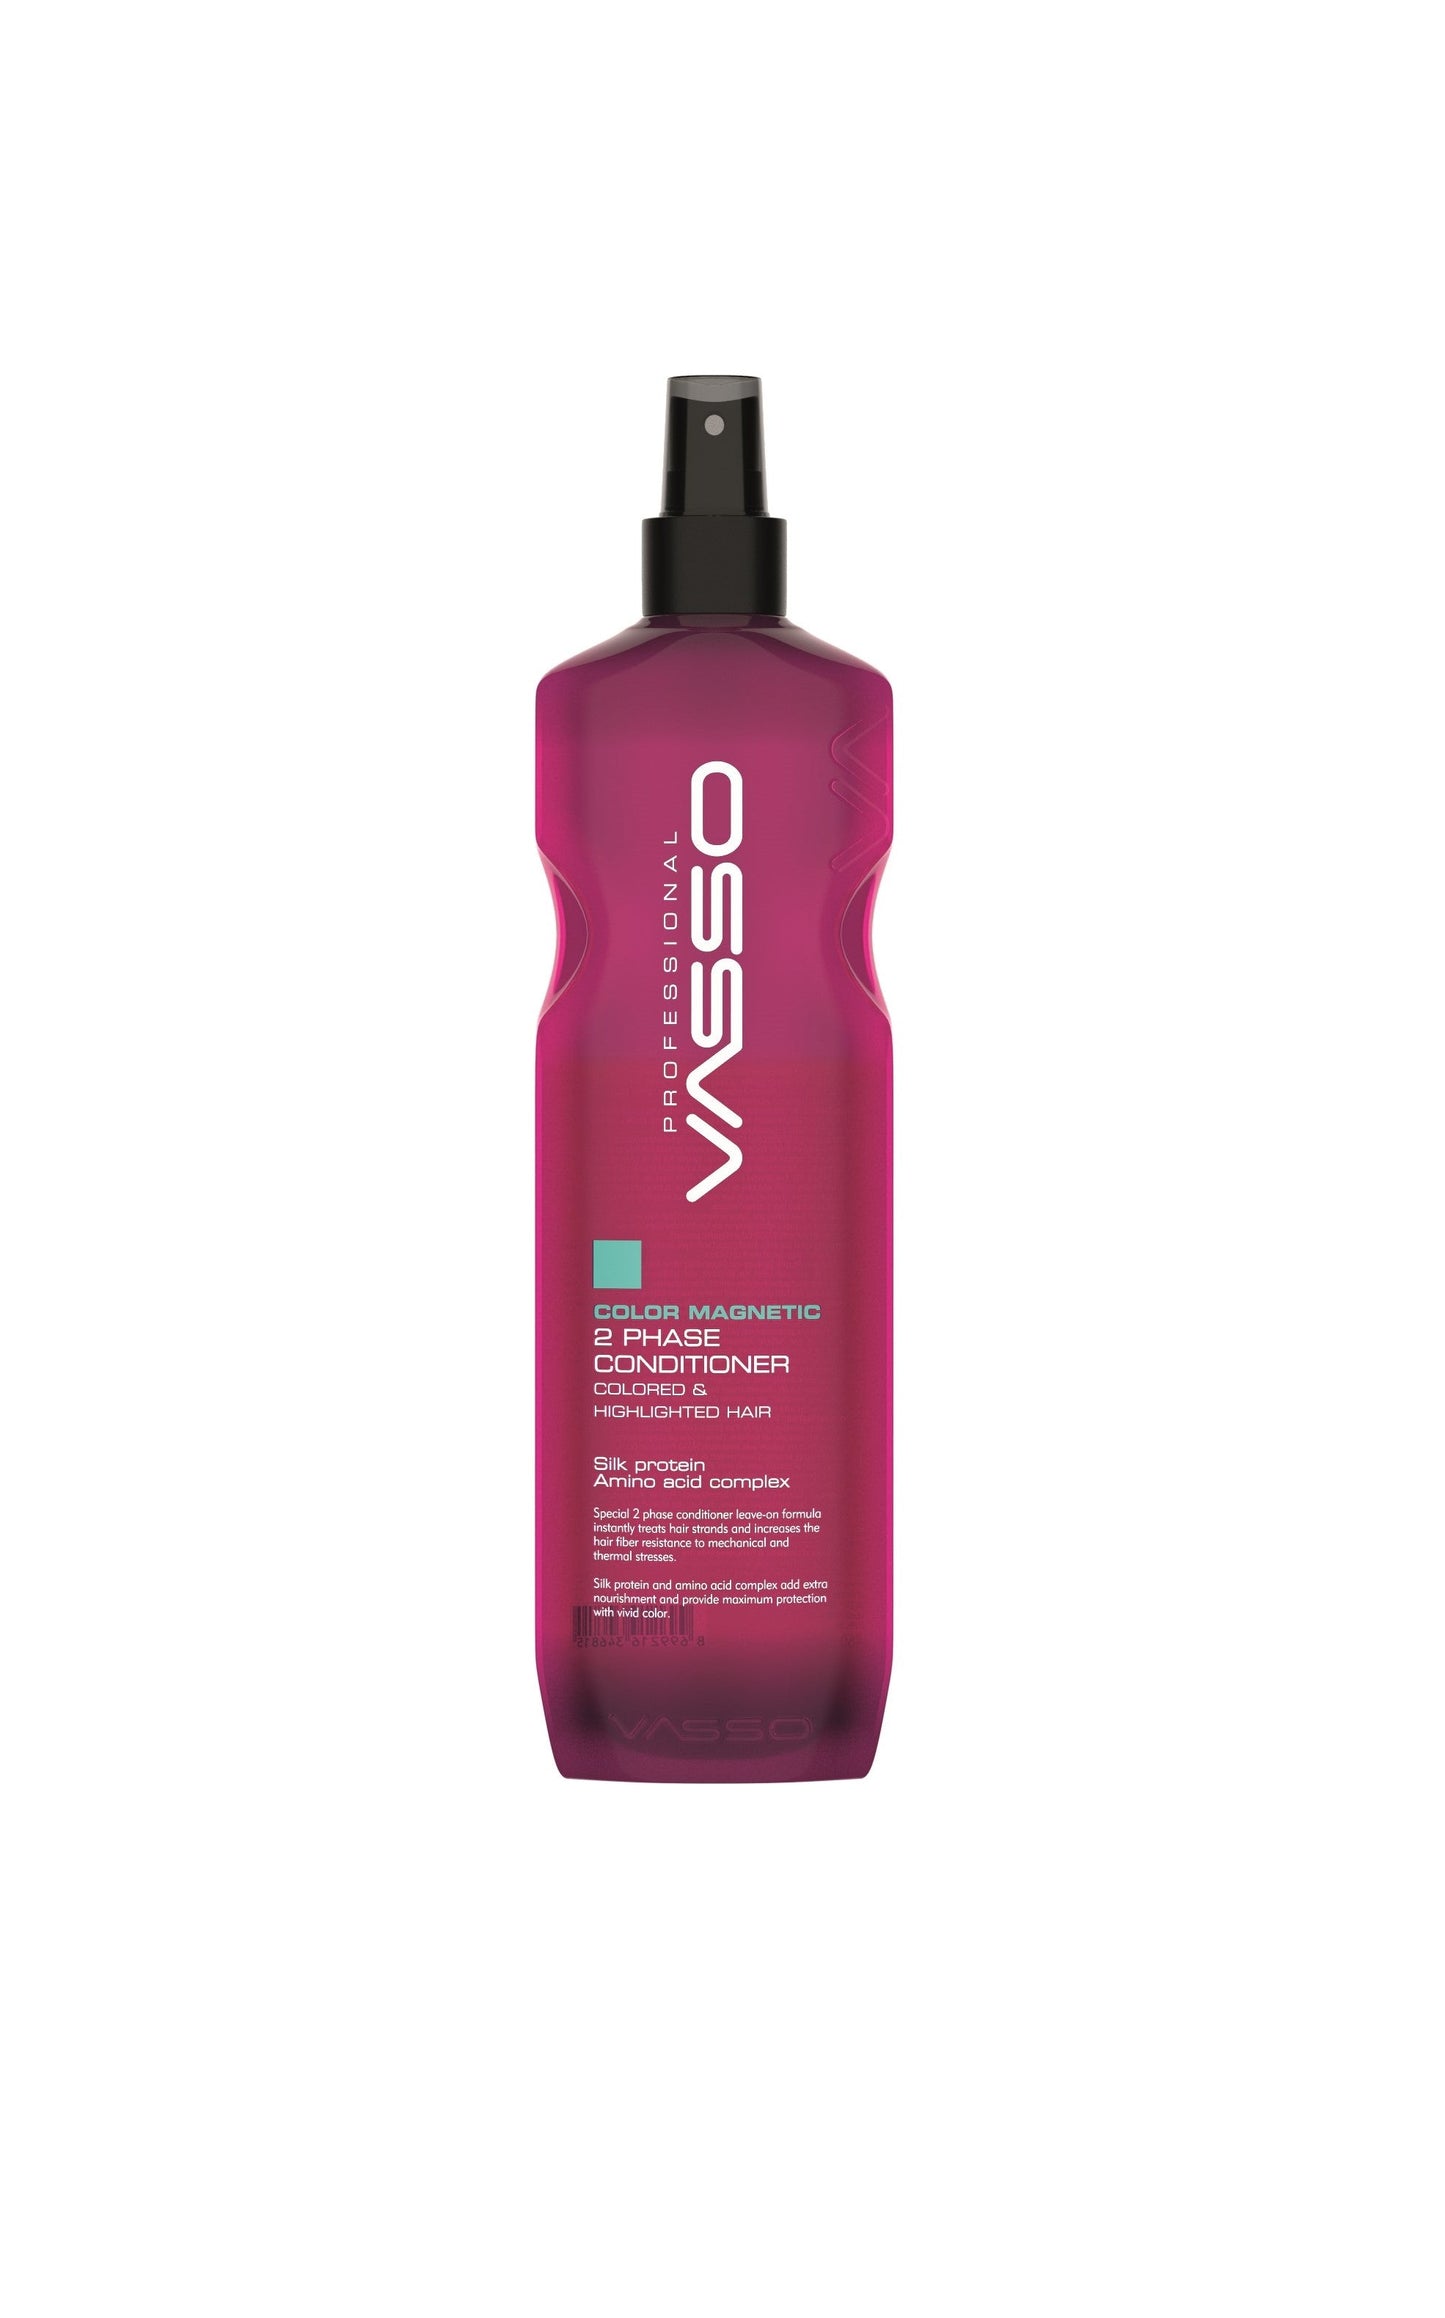 VASSO COLOR MAGNETIC 2 PHASE CONDITIONER 460 ml